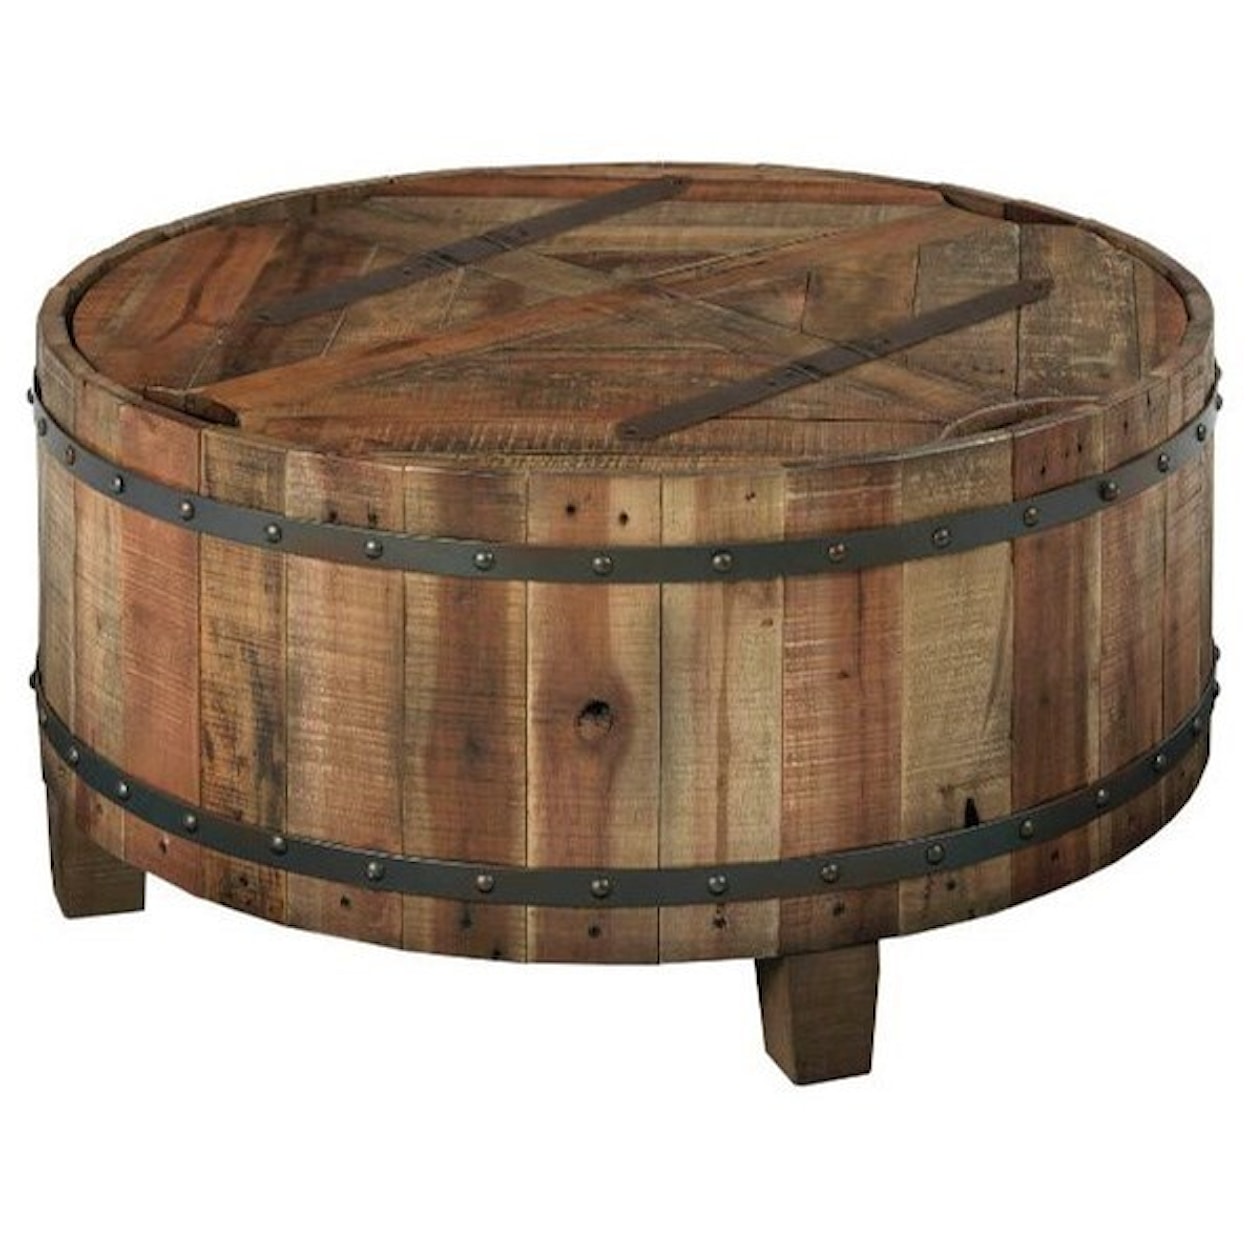 Kincaid Furniture Modern Classics Occasional Tables Round Barrel Inspired Cocktail Table